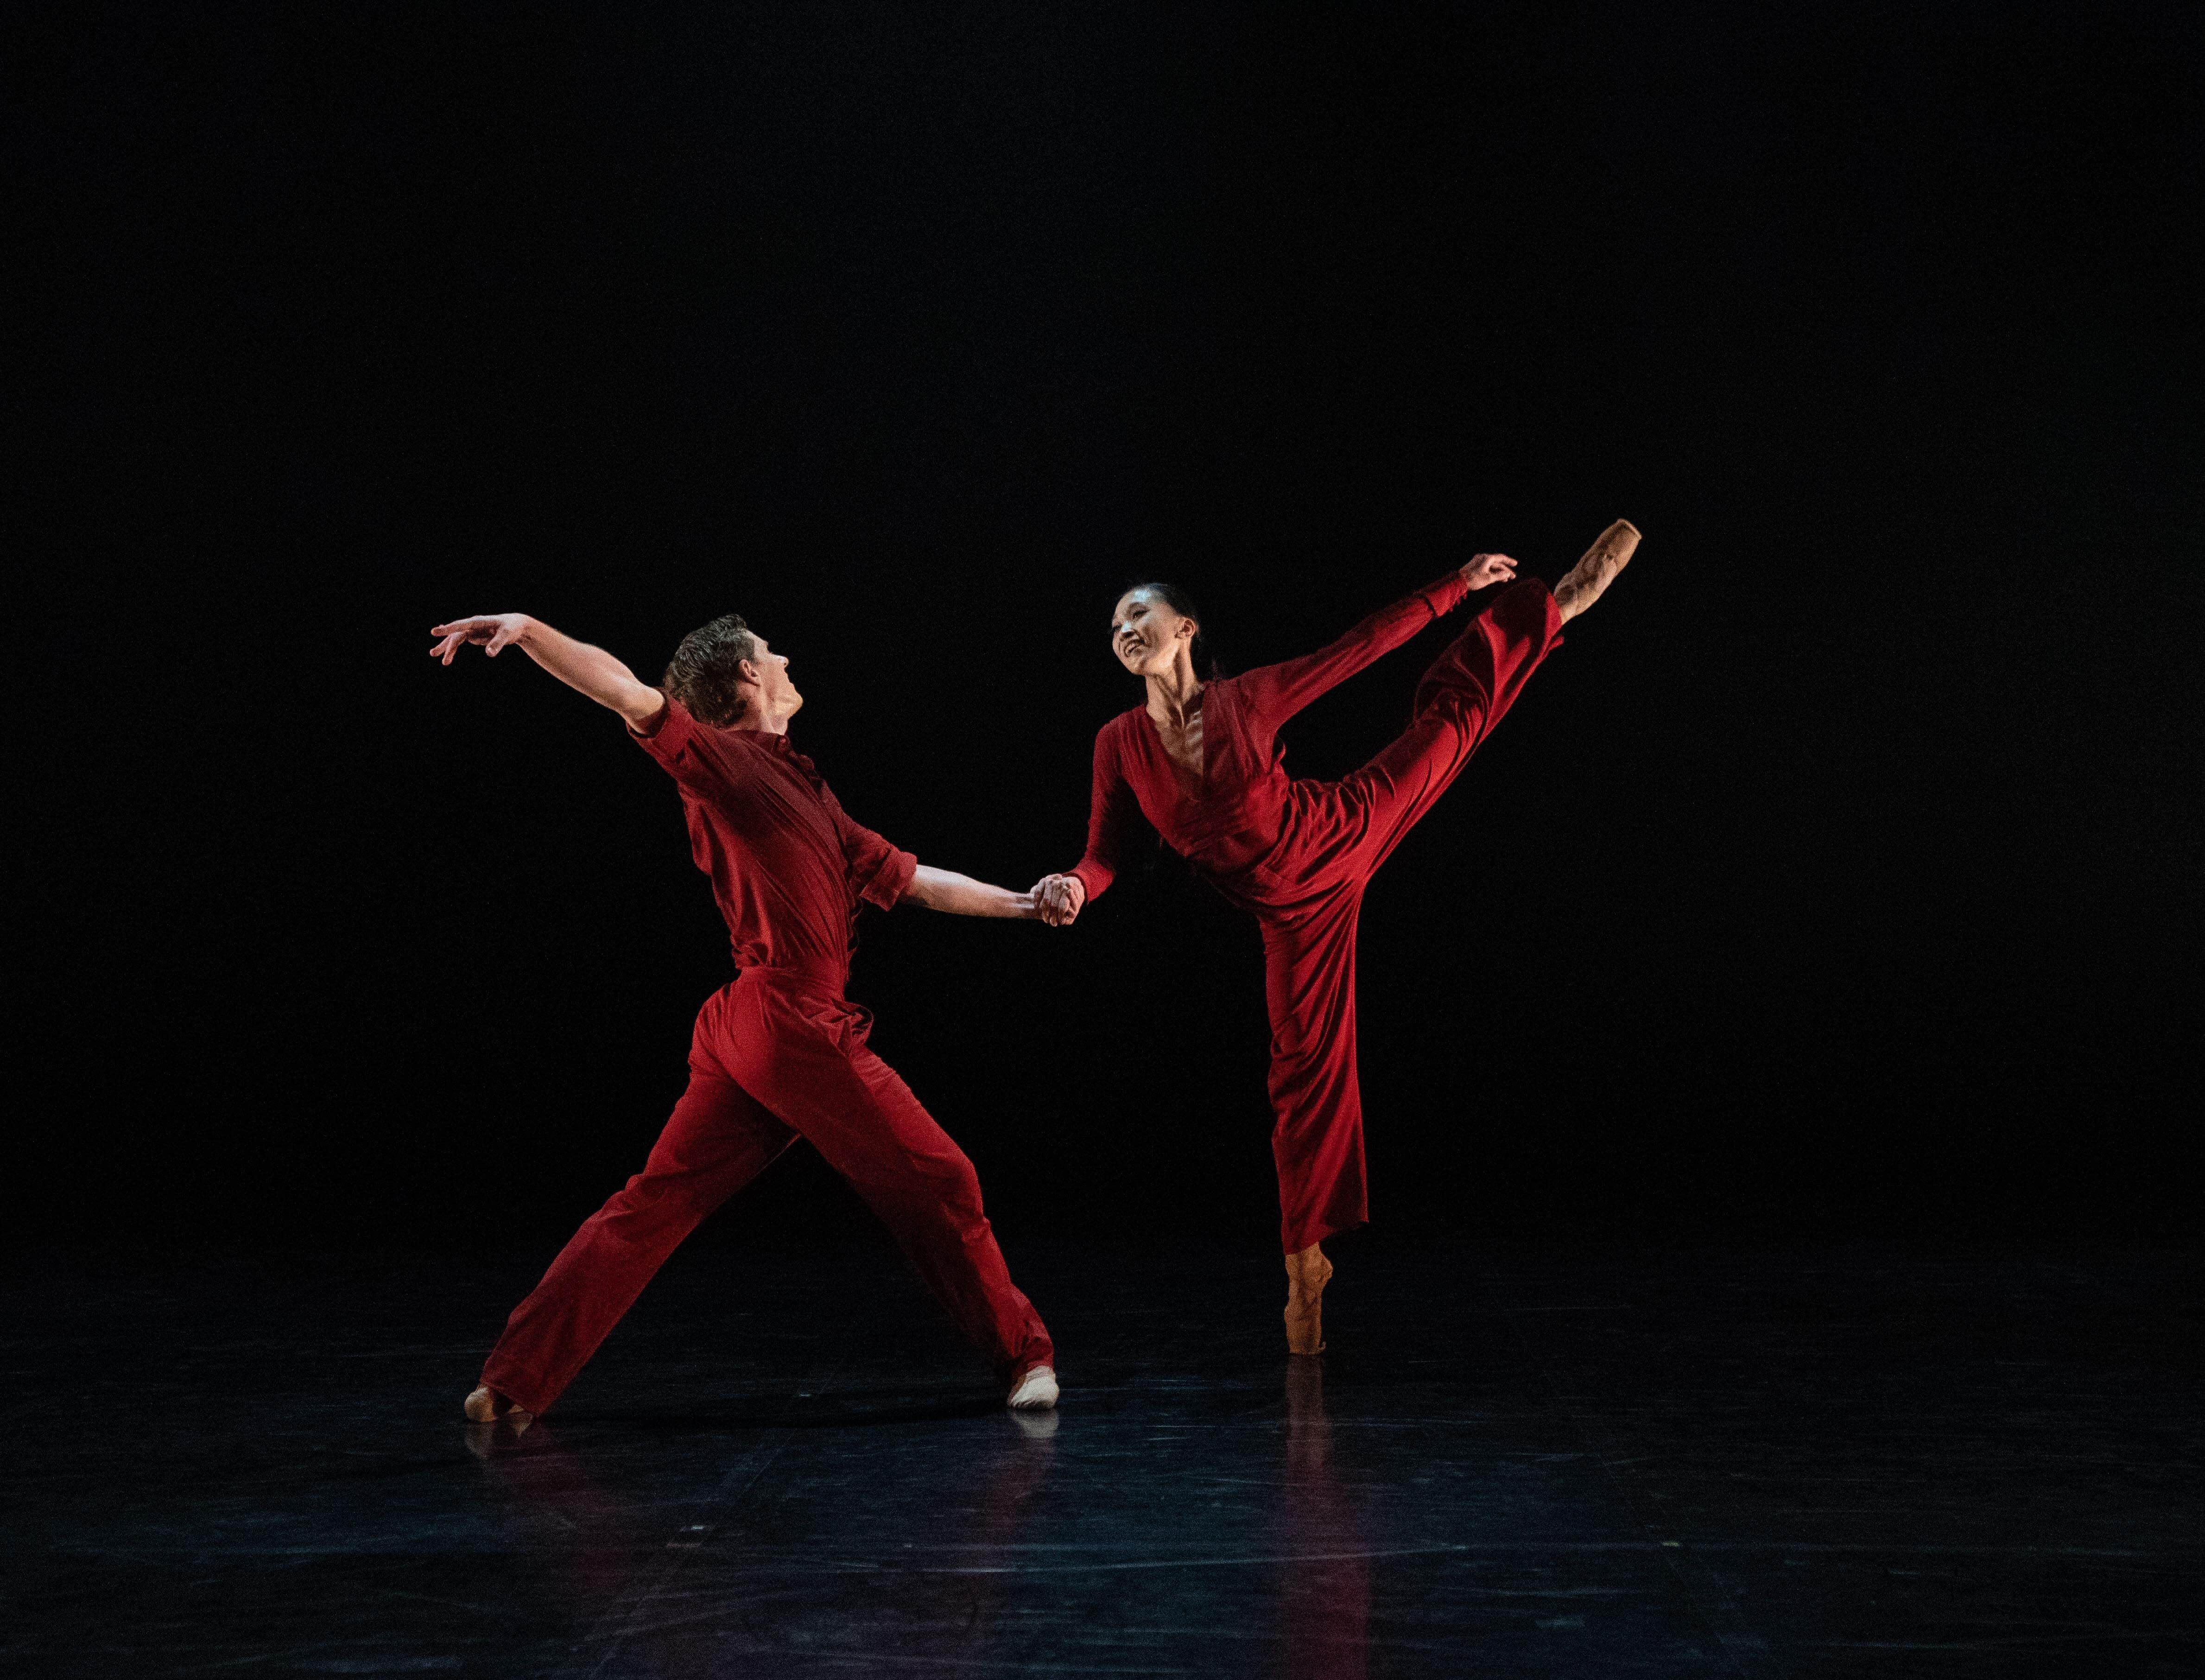 Picture of 2 ballet dancers wearing red overalls